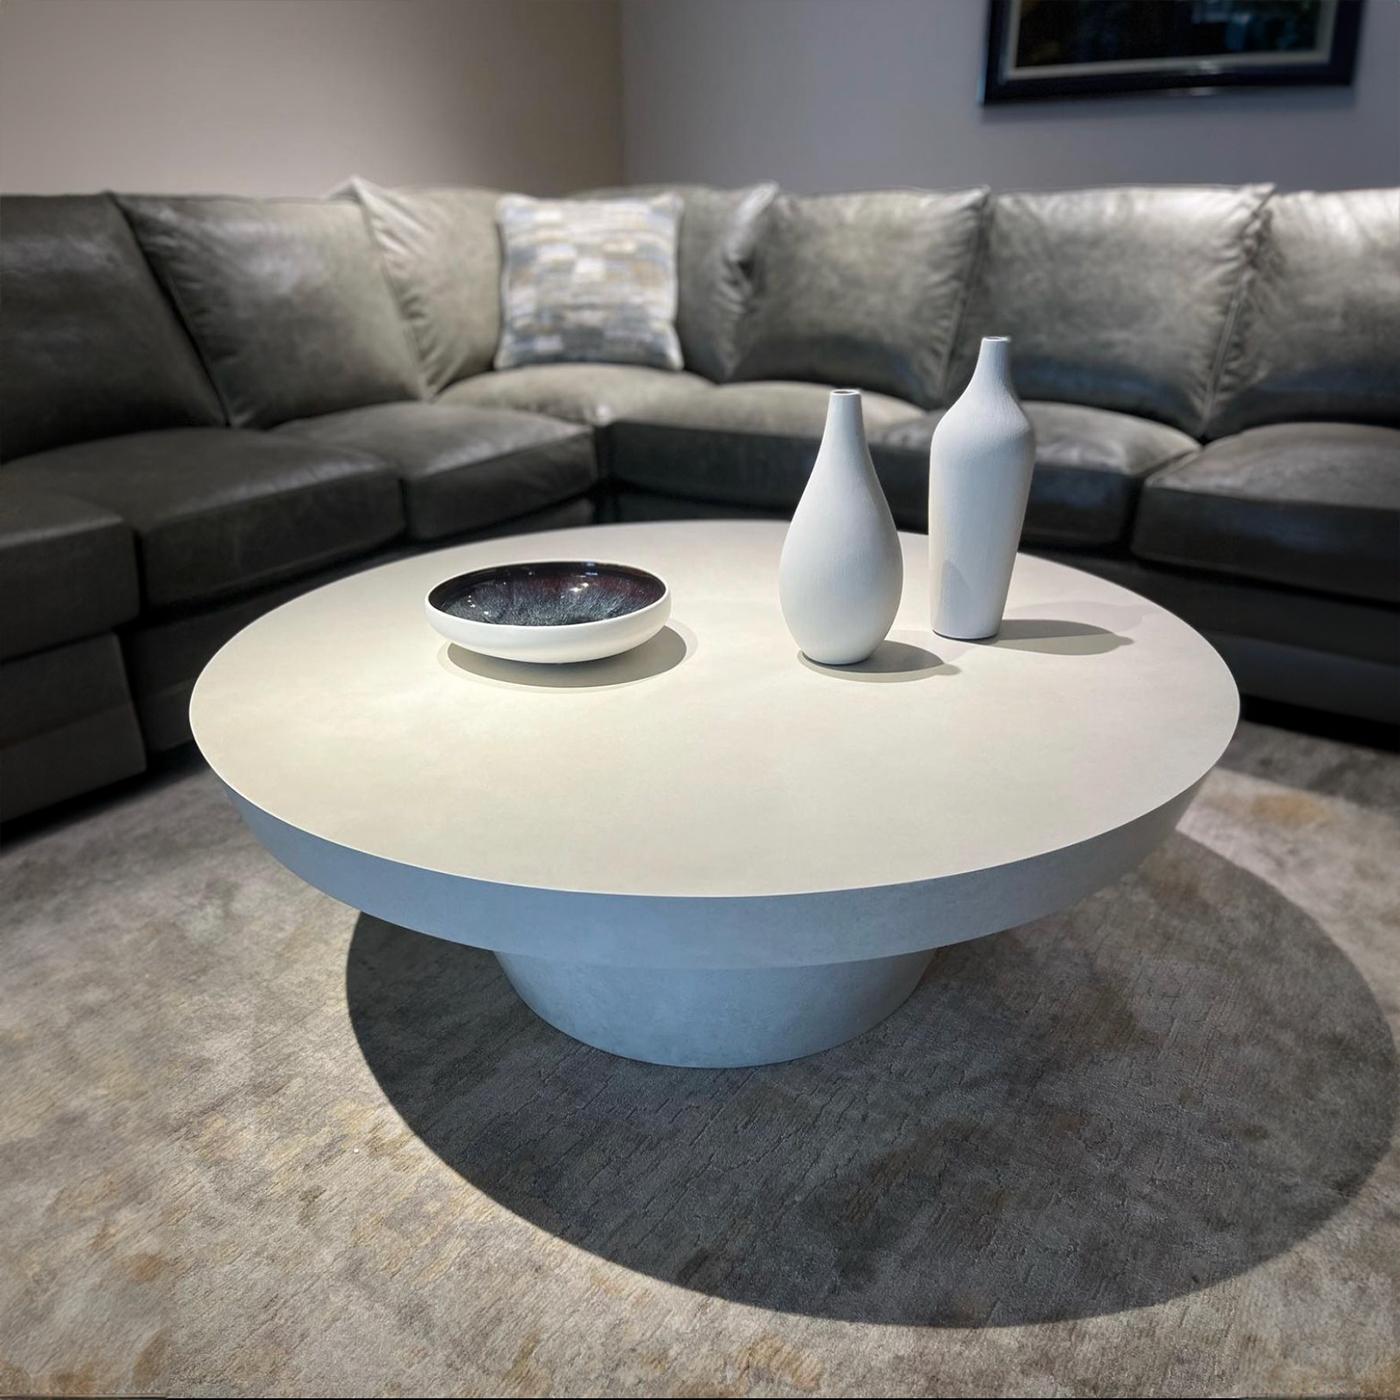 Contemporary round coffee table with a thick, tapered top edge and raised on a tapered plinth base. 

The Egret taupe-white lacquer finish with a satin sheen adds a luxurious touch, creating a seamless and polished look.

Dimensions: 48